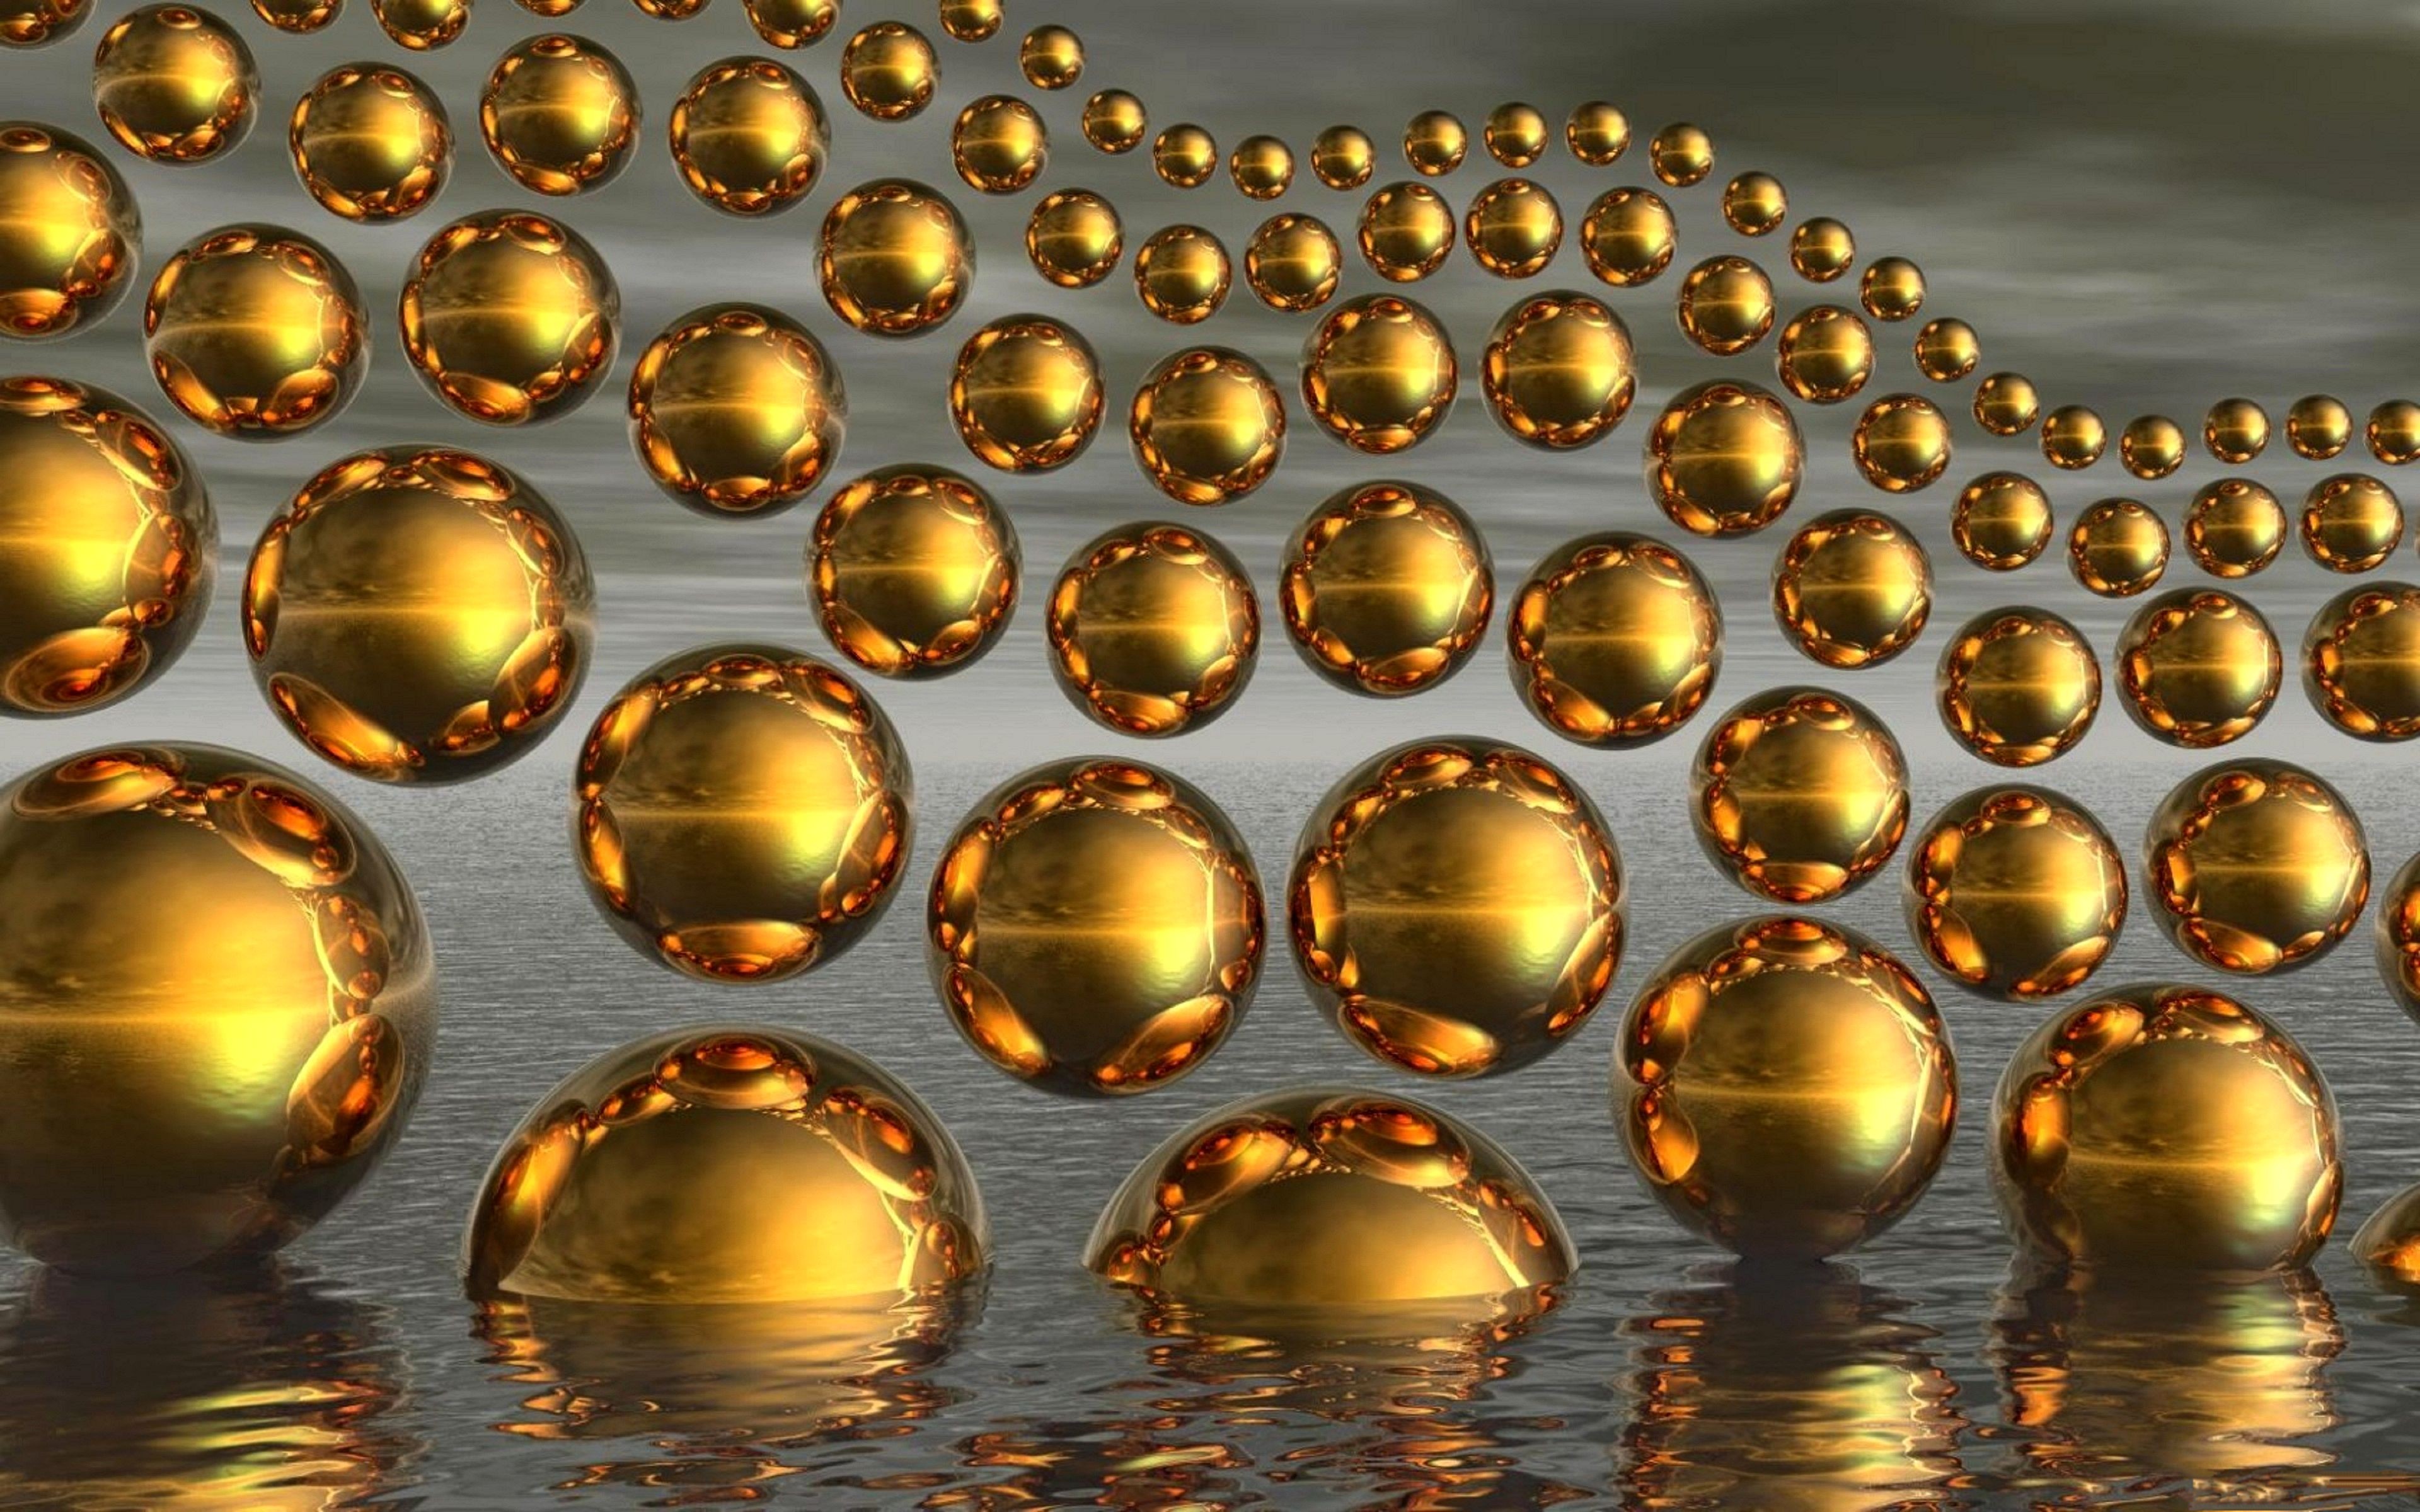 Wallpapers balls gold water on the desktop